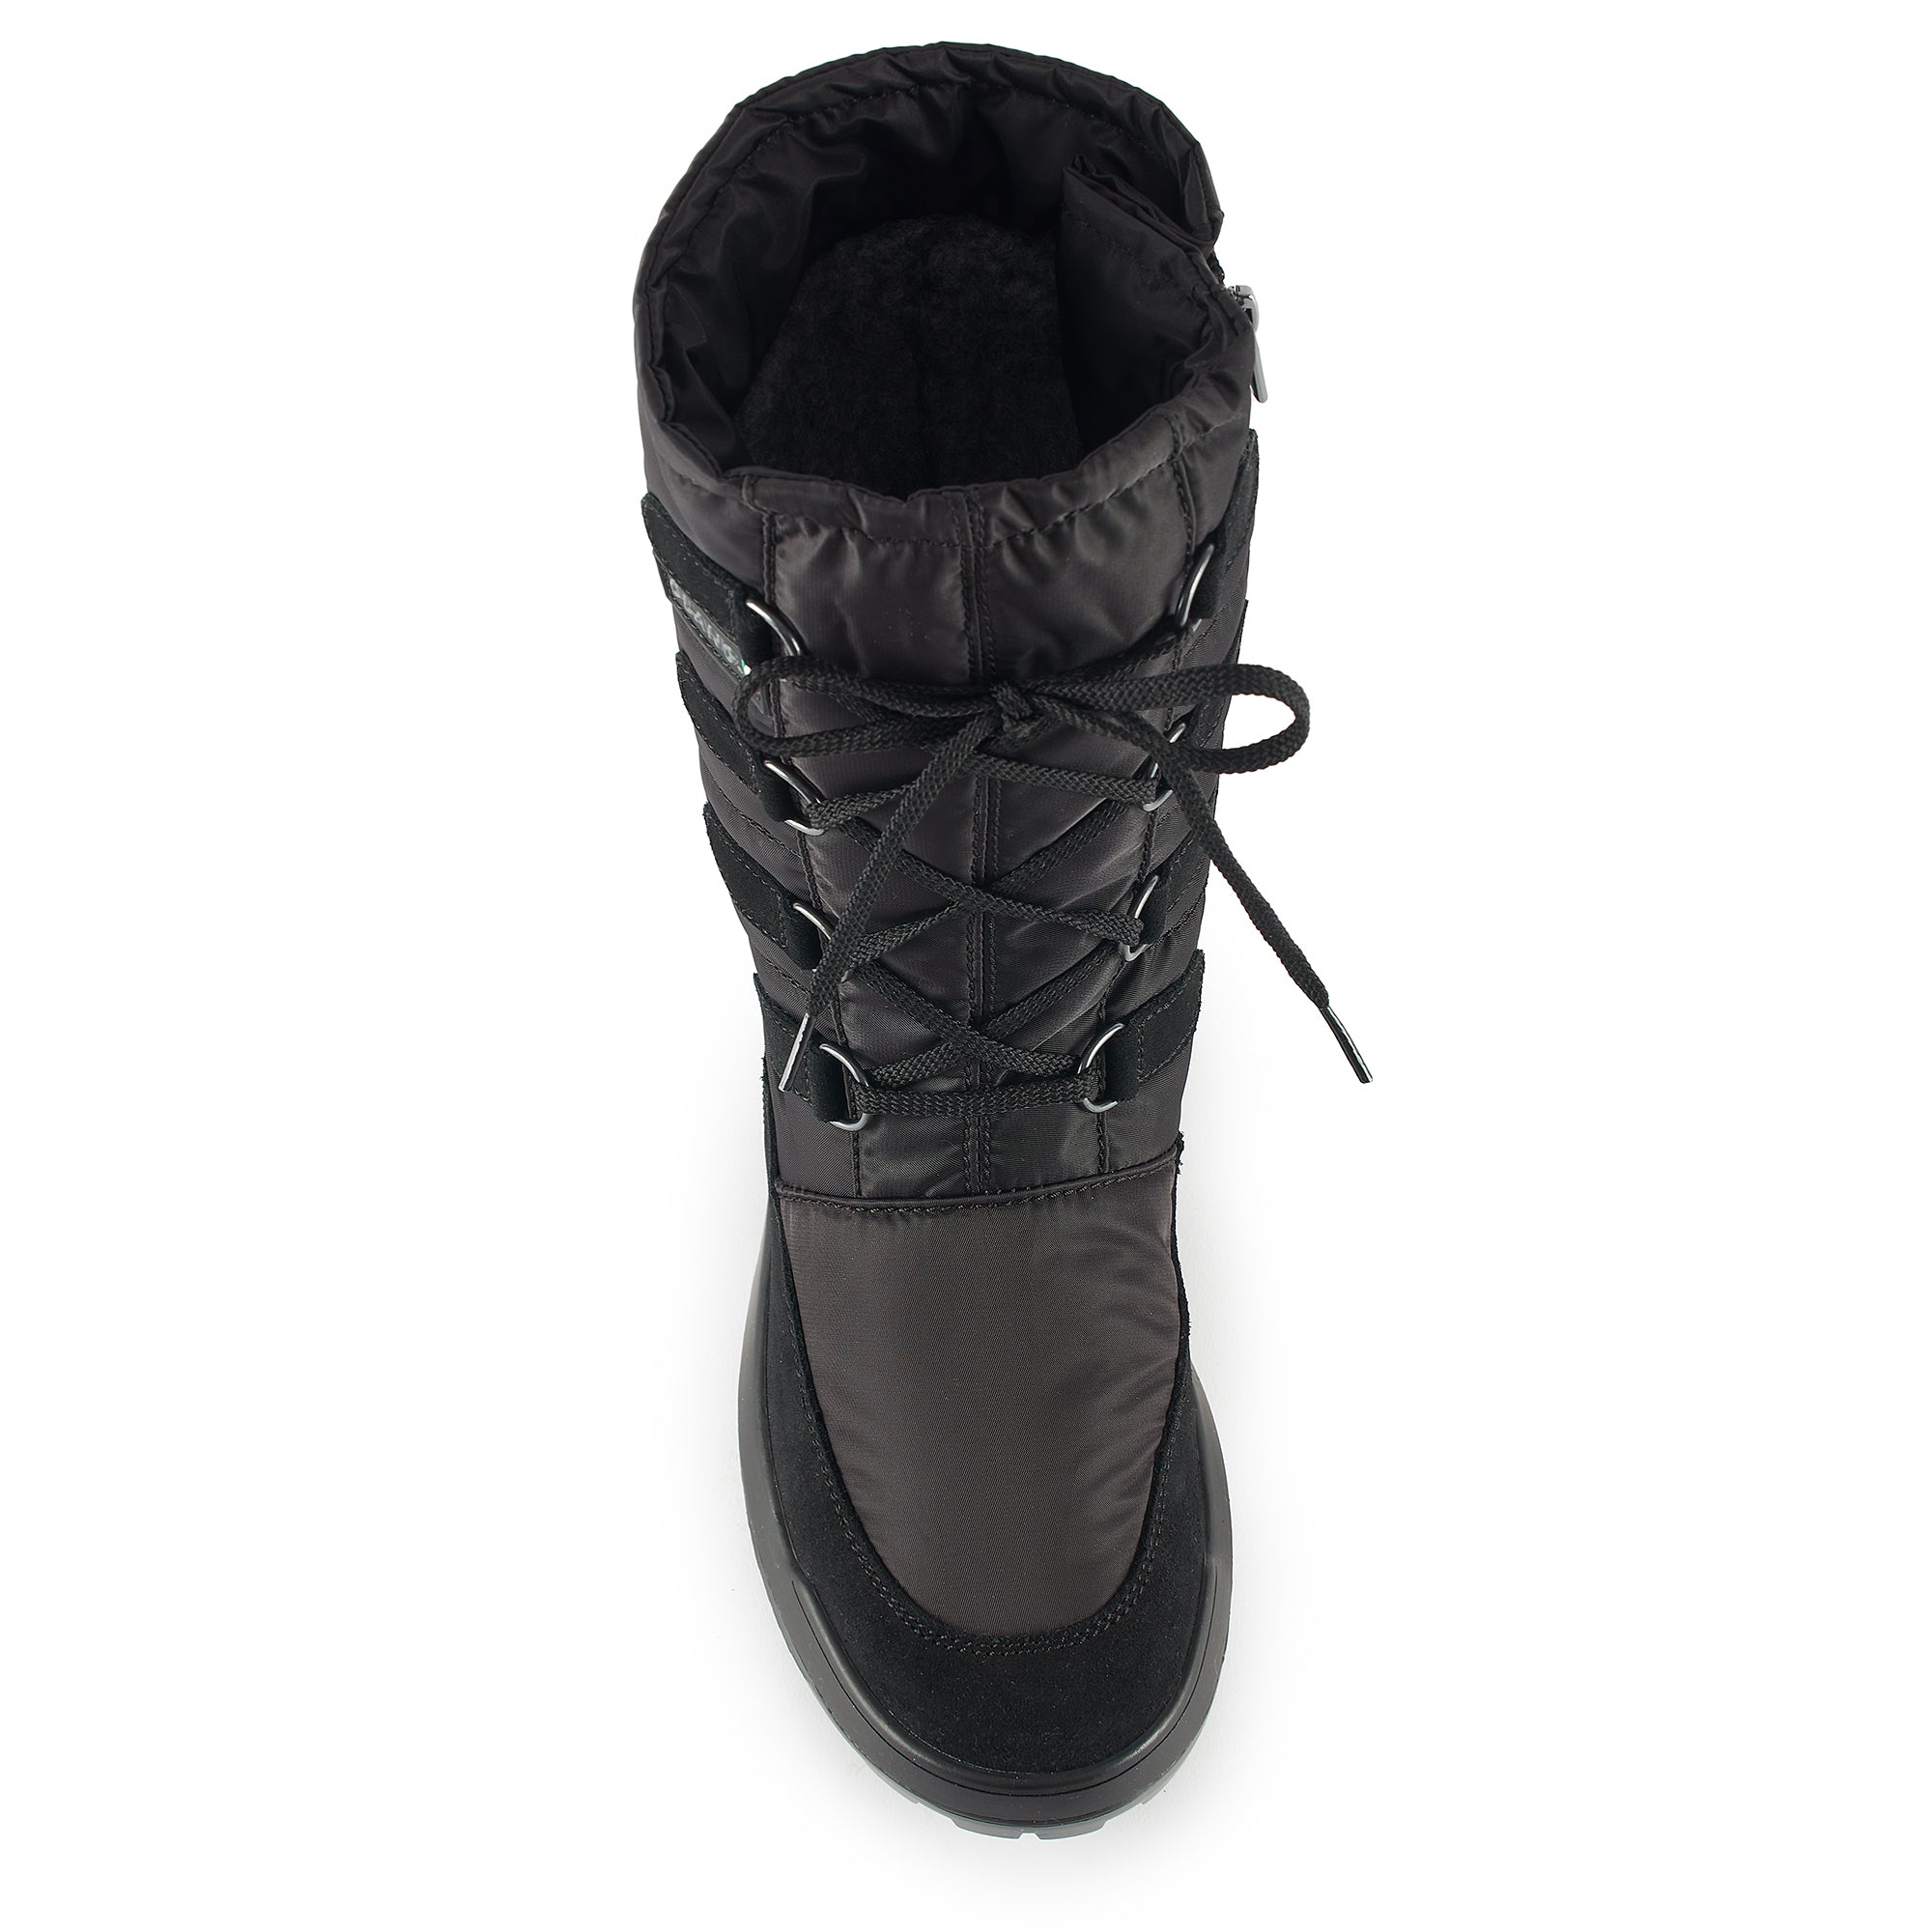 OLANG STOCCARDA - Women's winter boots - Boutique Bubbles